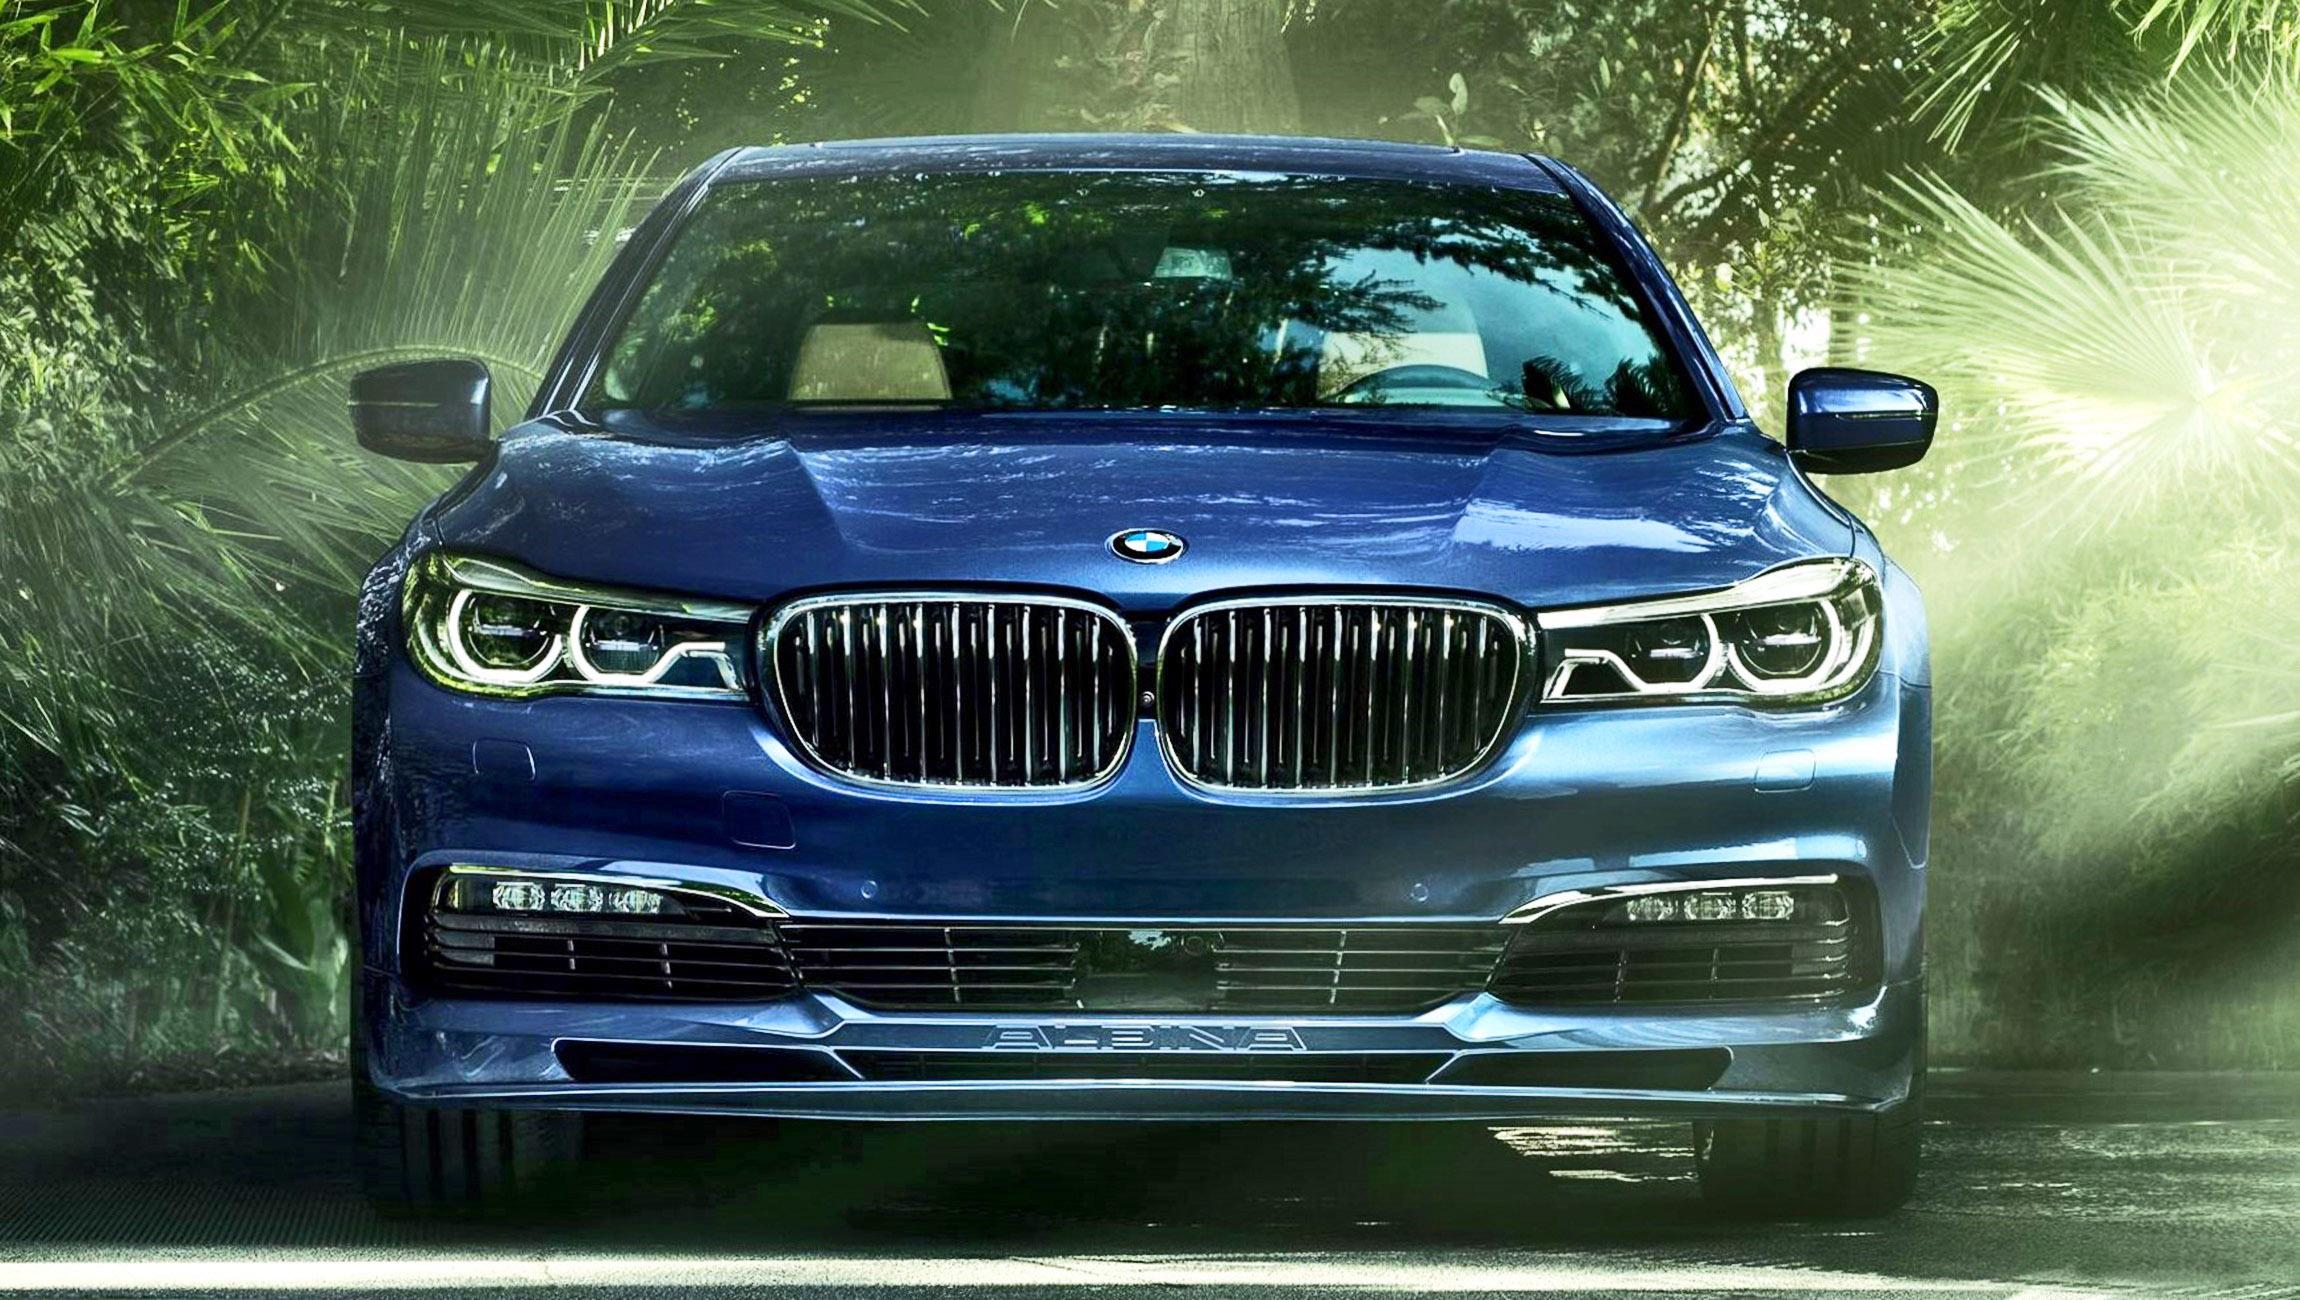 Alpina B7 Wallpaper HD Photo, Wallpaper and other Image